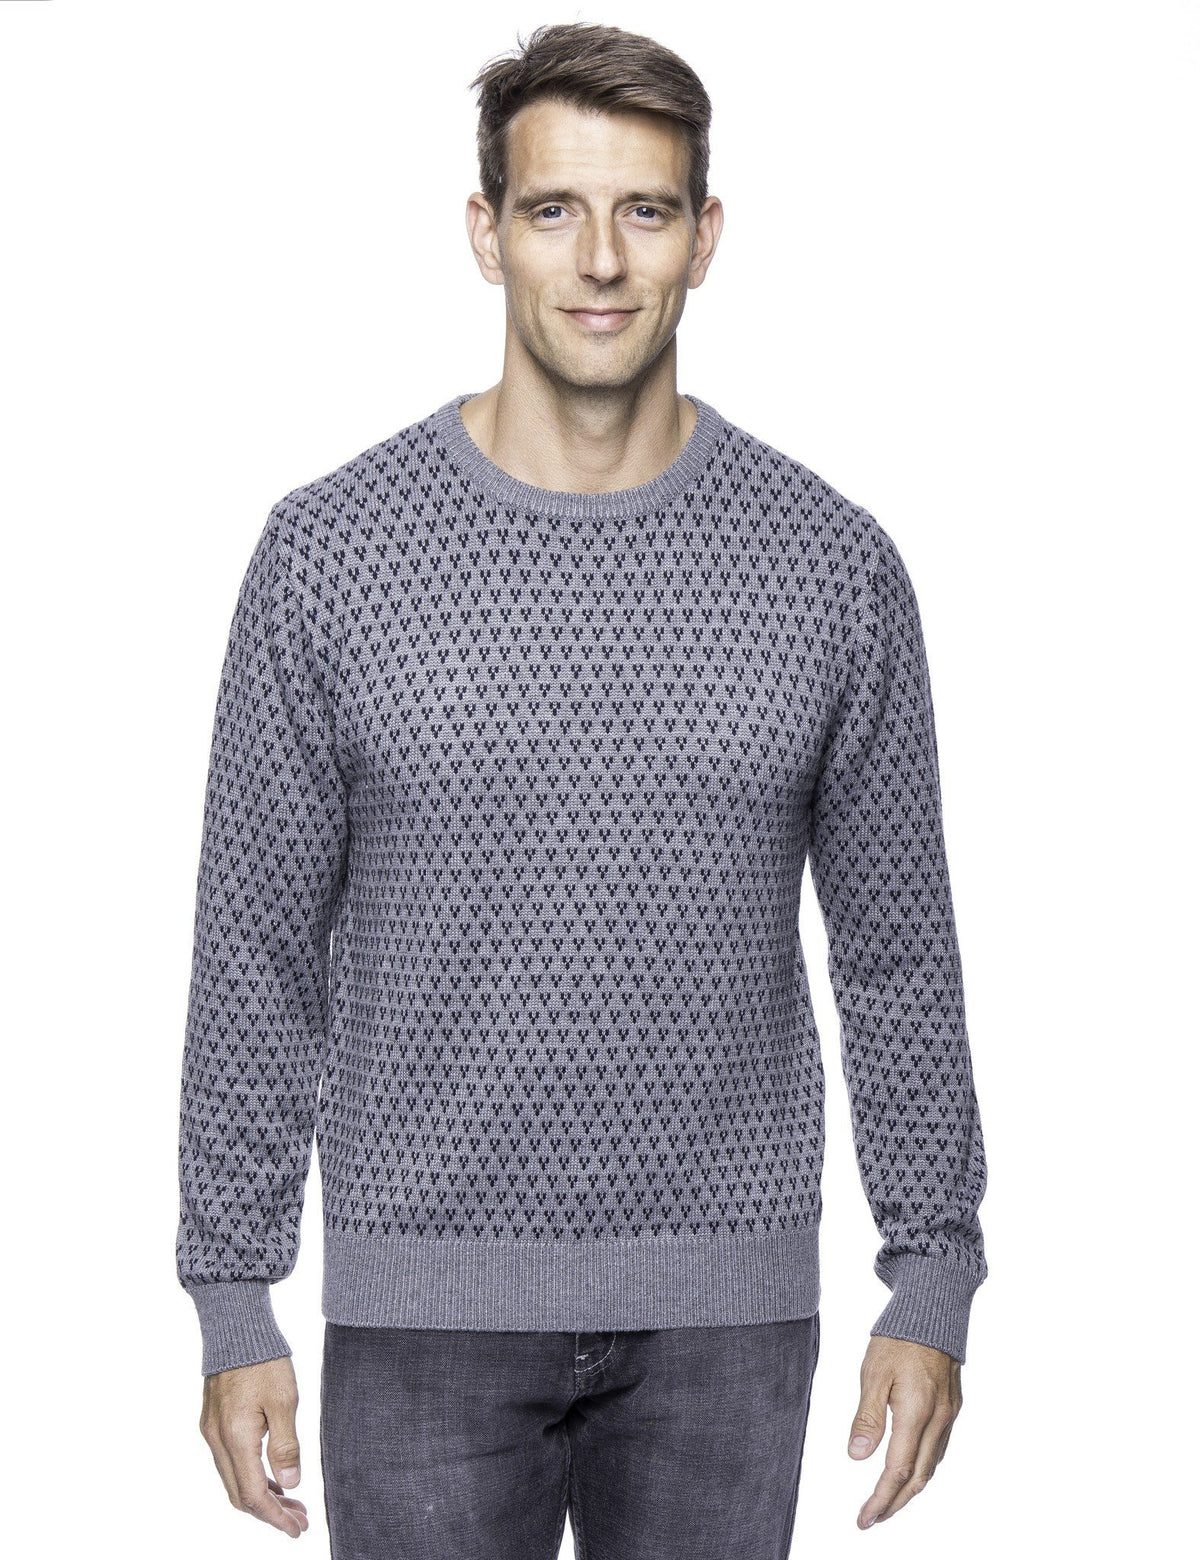 Men's Wool Blend Crew Neck Pullover Sweater with Jacquard Effect - Heather Grey/Navy